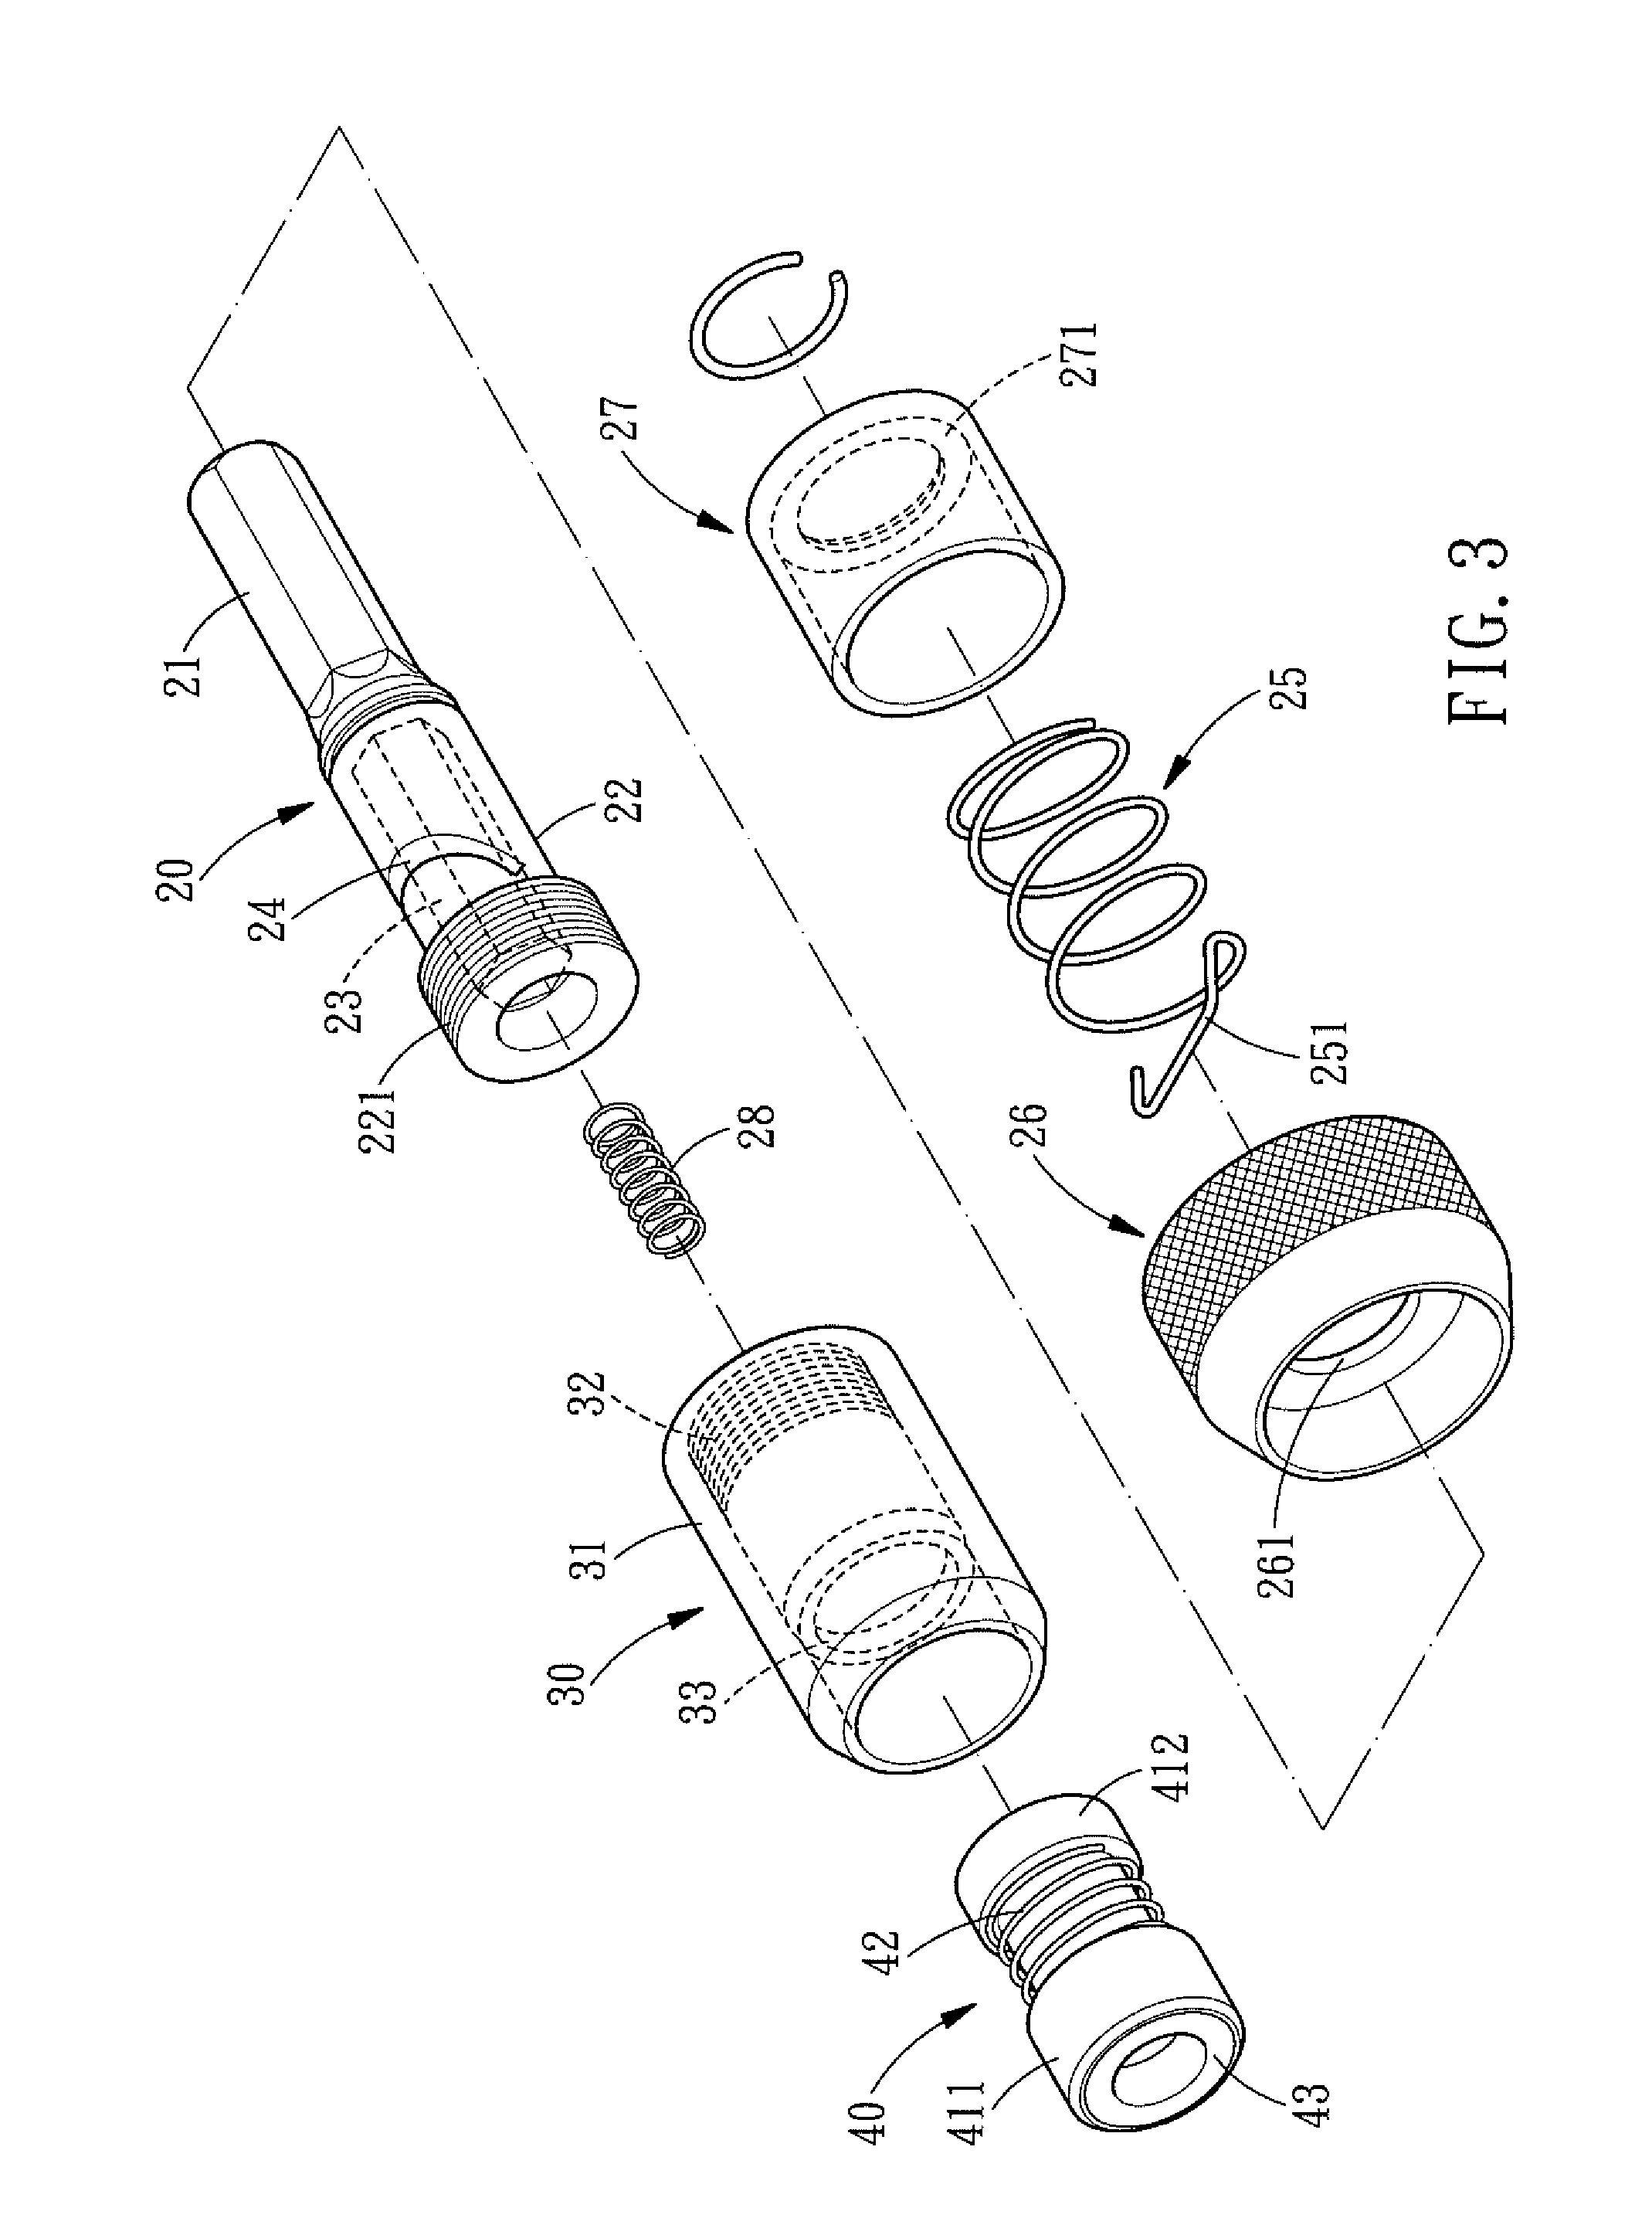 Connector structure with a detachable mounting tube